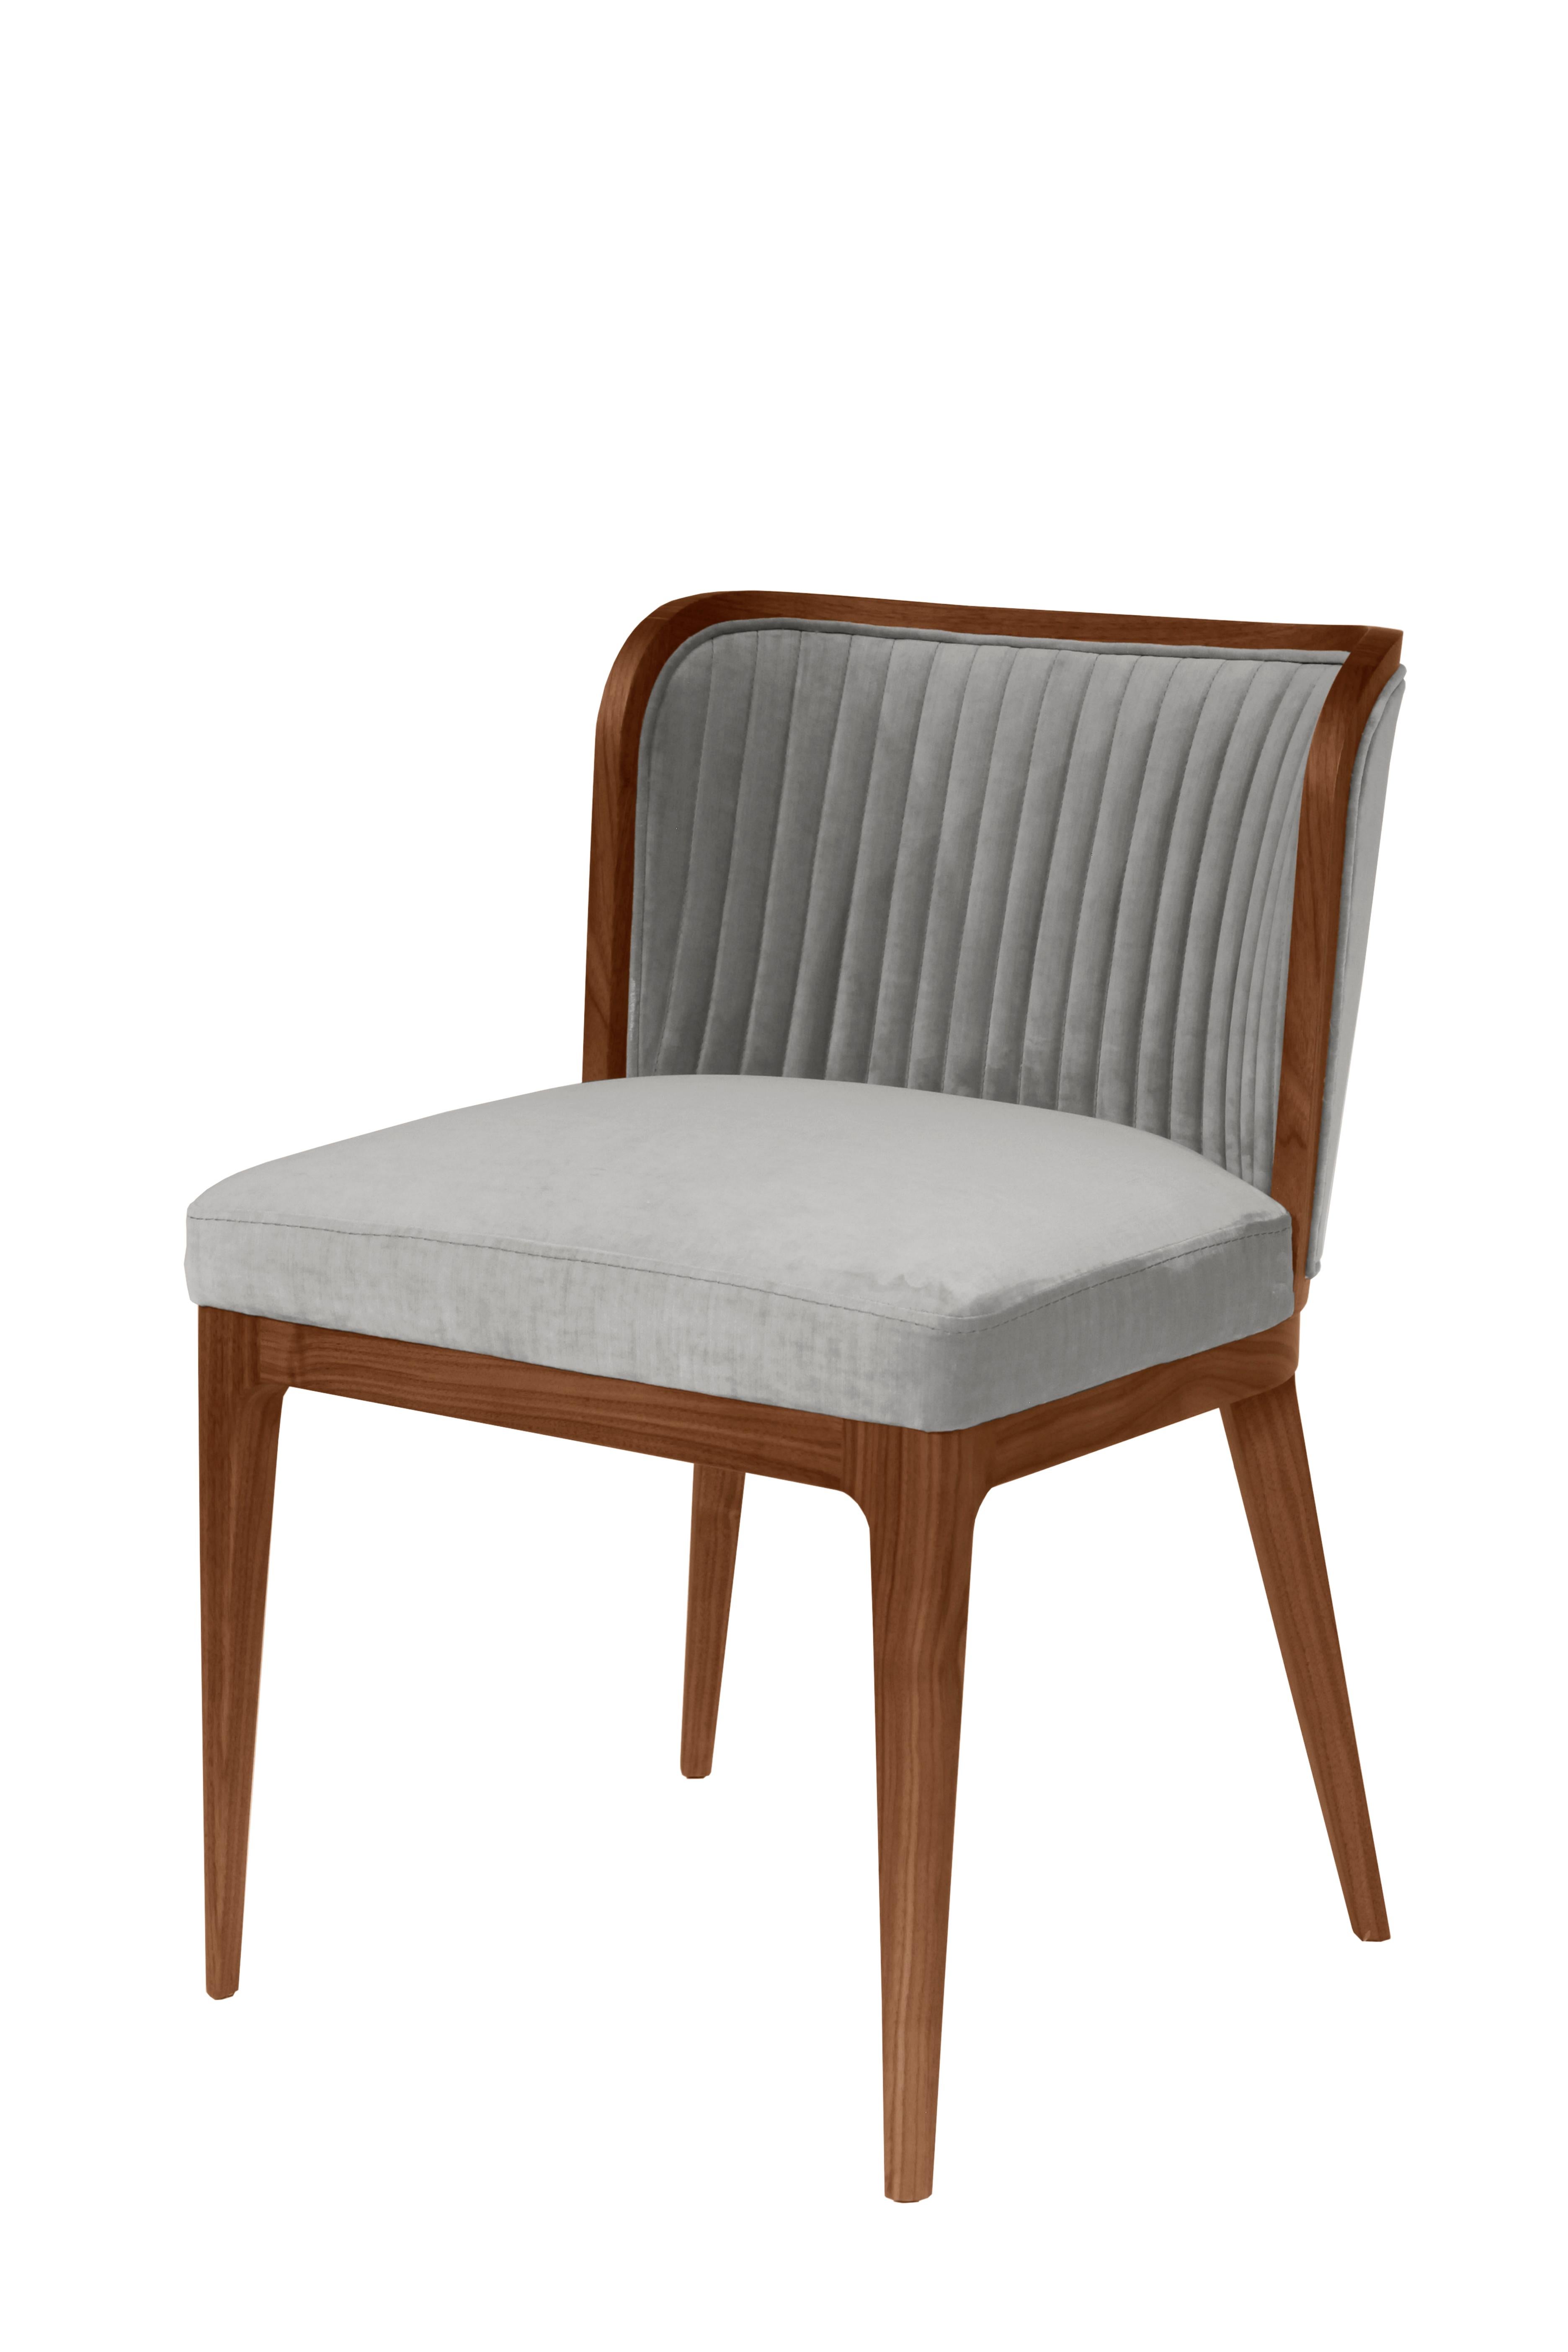 A low and wide rounded back with channel tufting and a deep cushioned seat offers an inviting chair for any dinner setting. Flared back legs provide an elegant touch to a Classic silhouette.